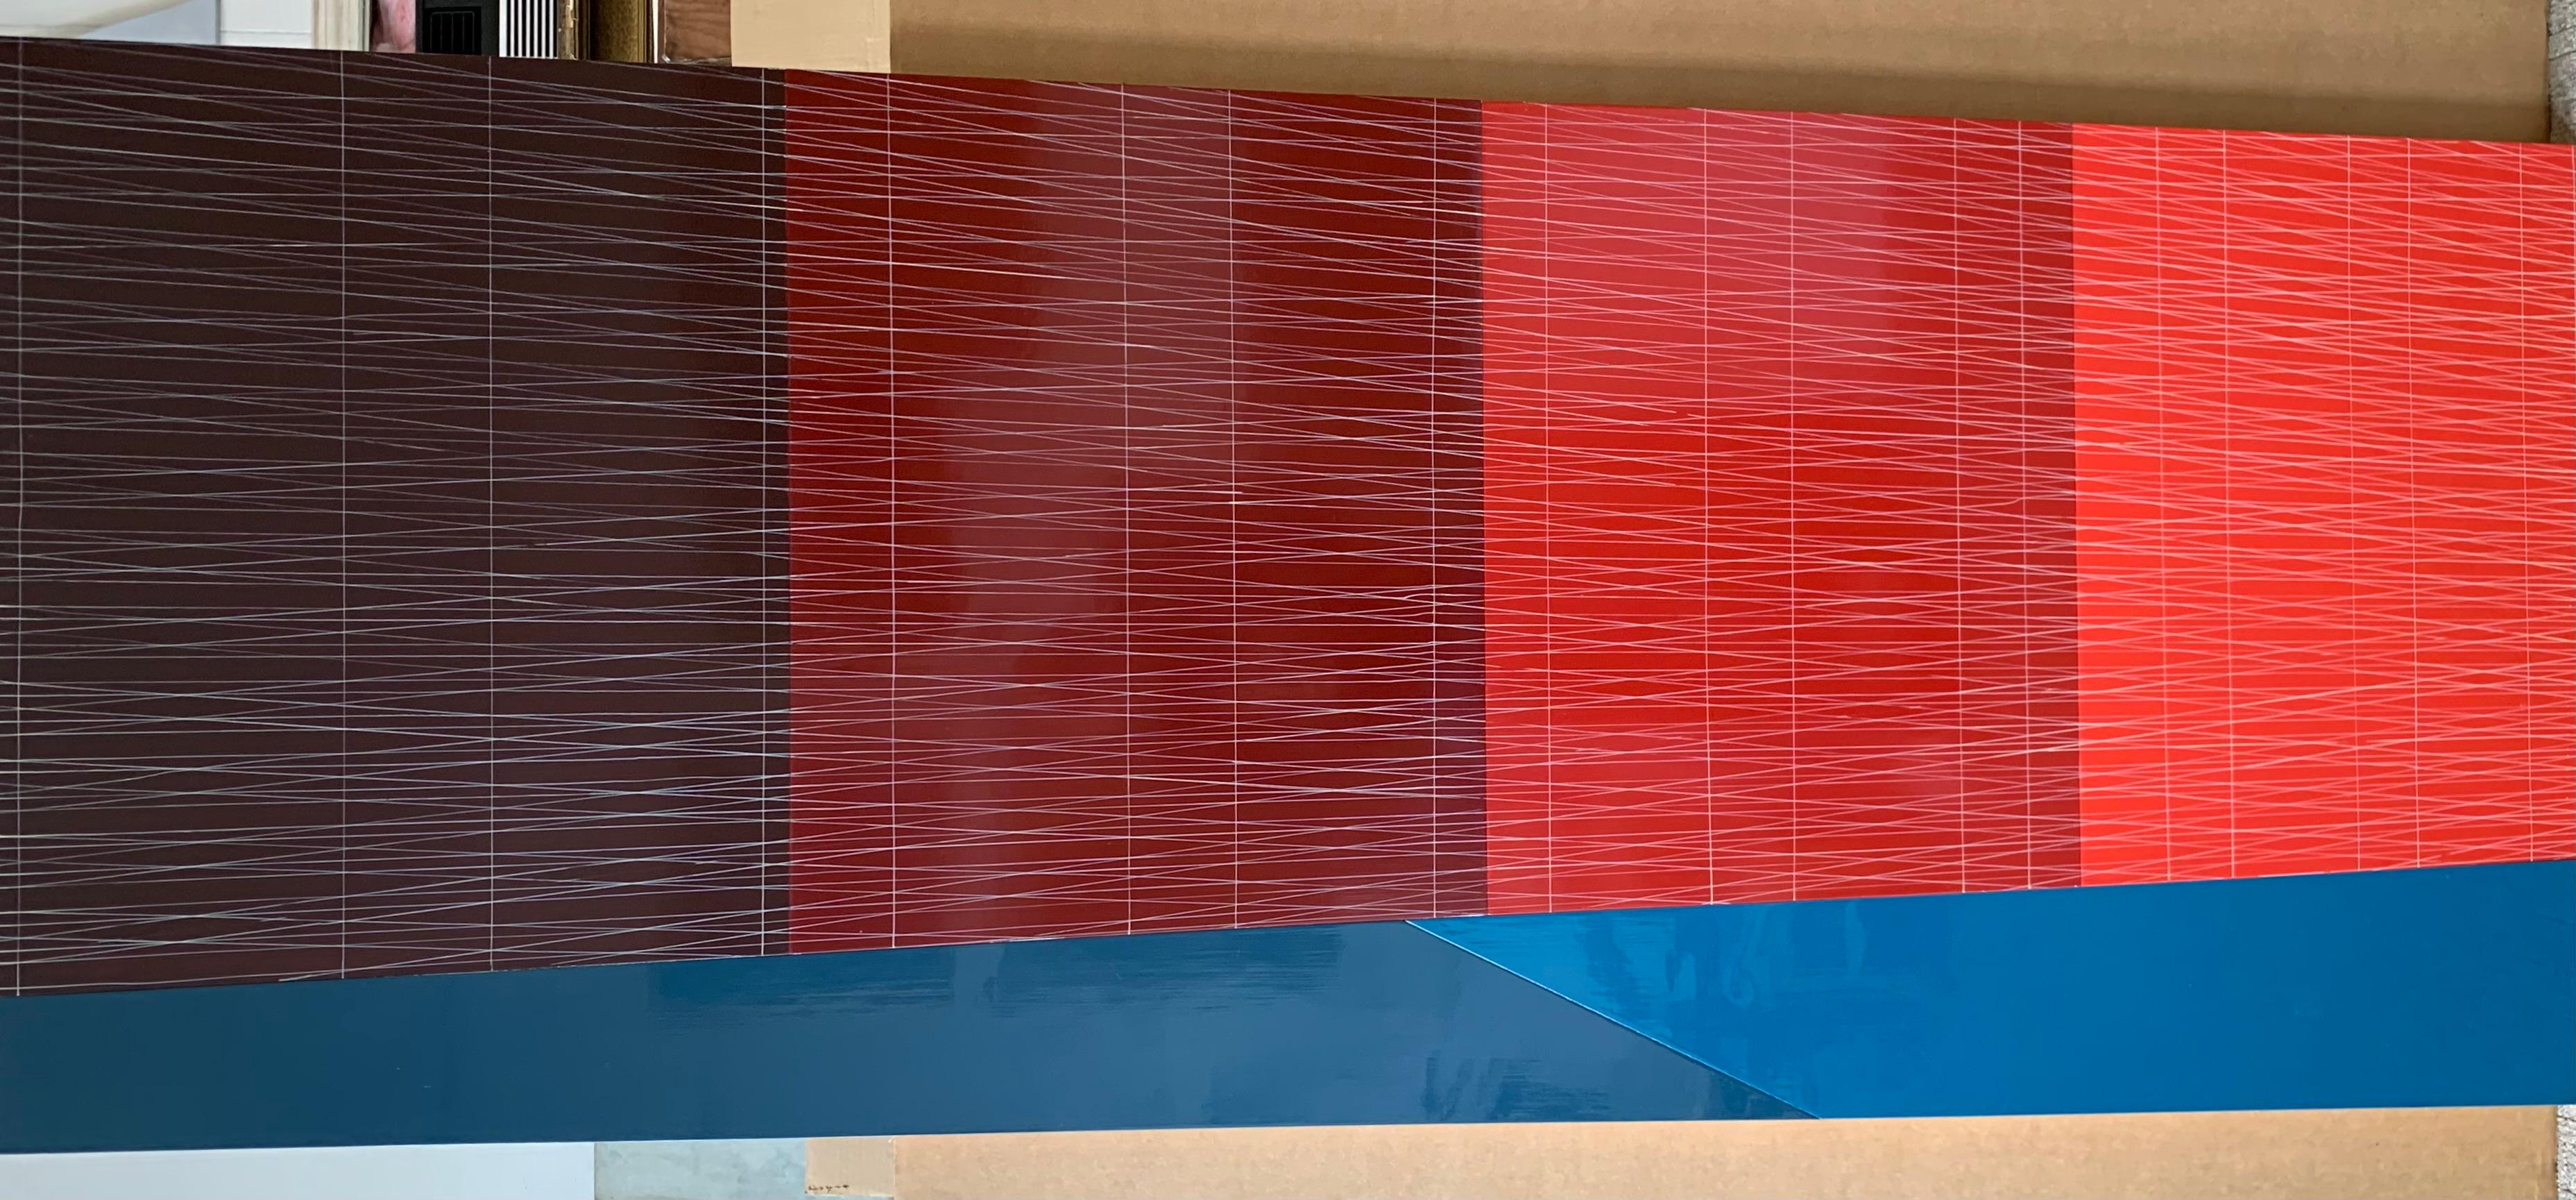 Kate Shepherd Abstract Painting - Slanted Blue Ground, Four Red Walls (Maroon to Poppy)